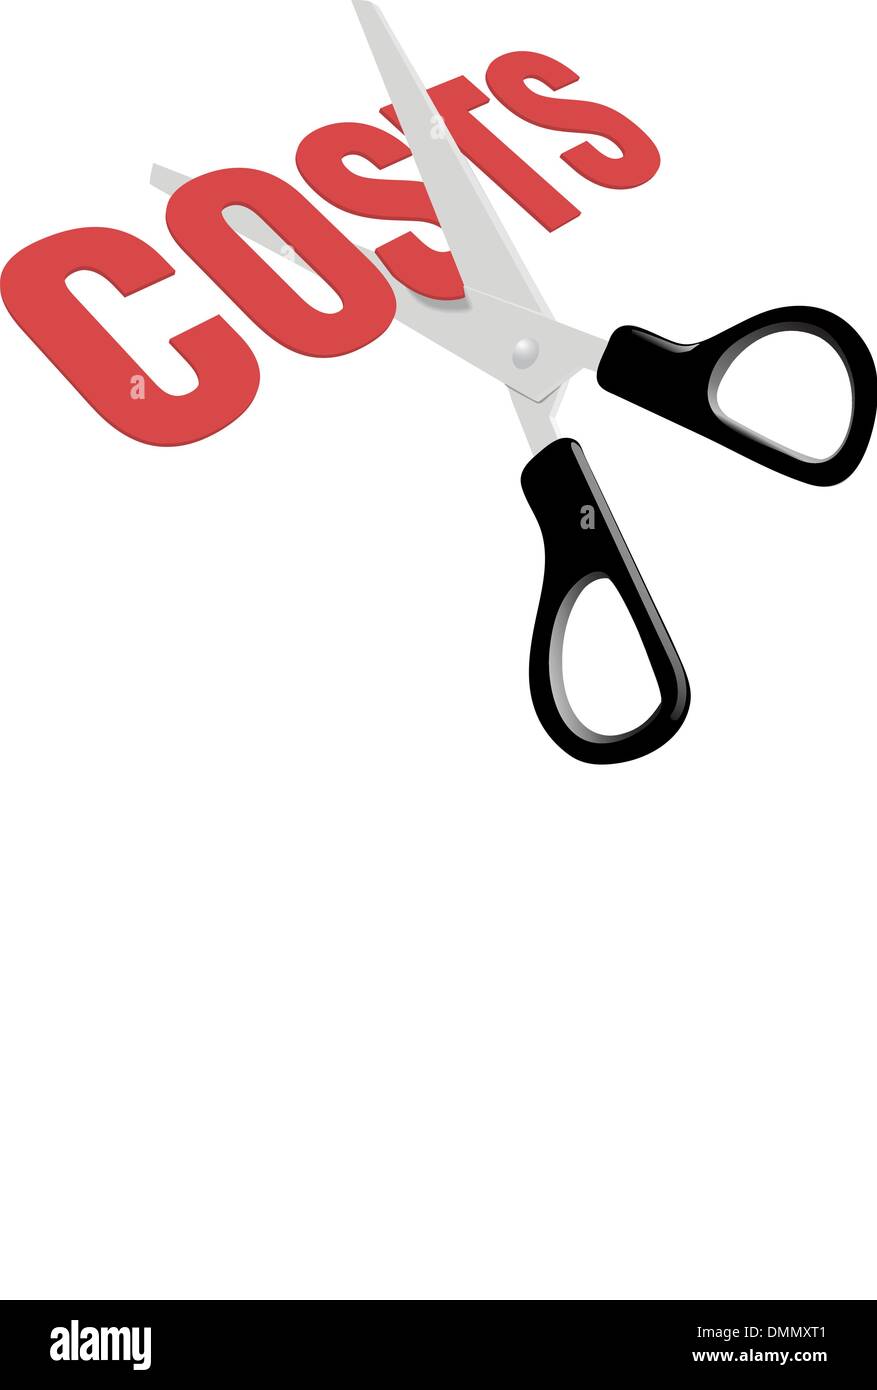 Scissors cut business expense costs Stock Vector